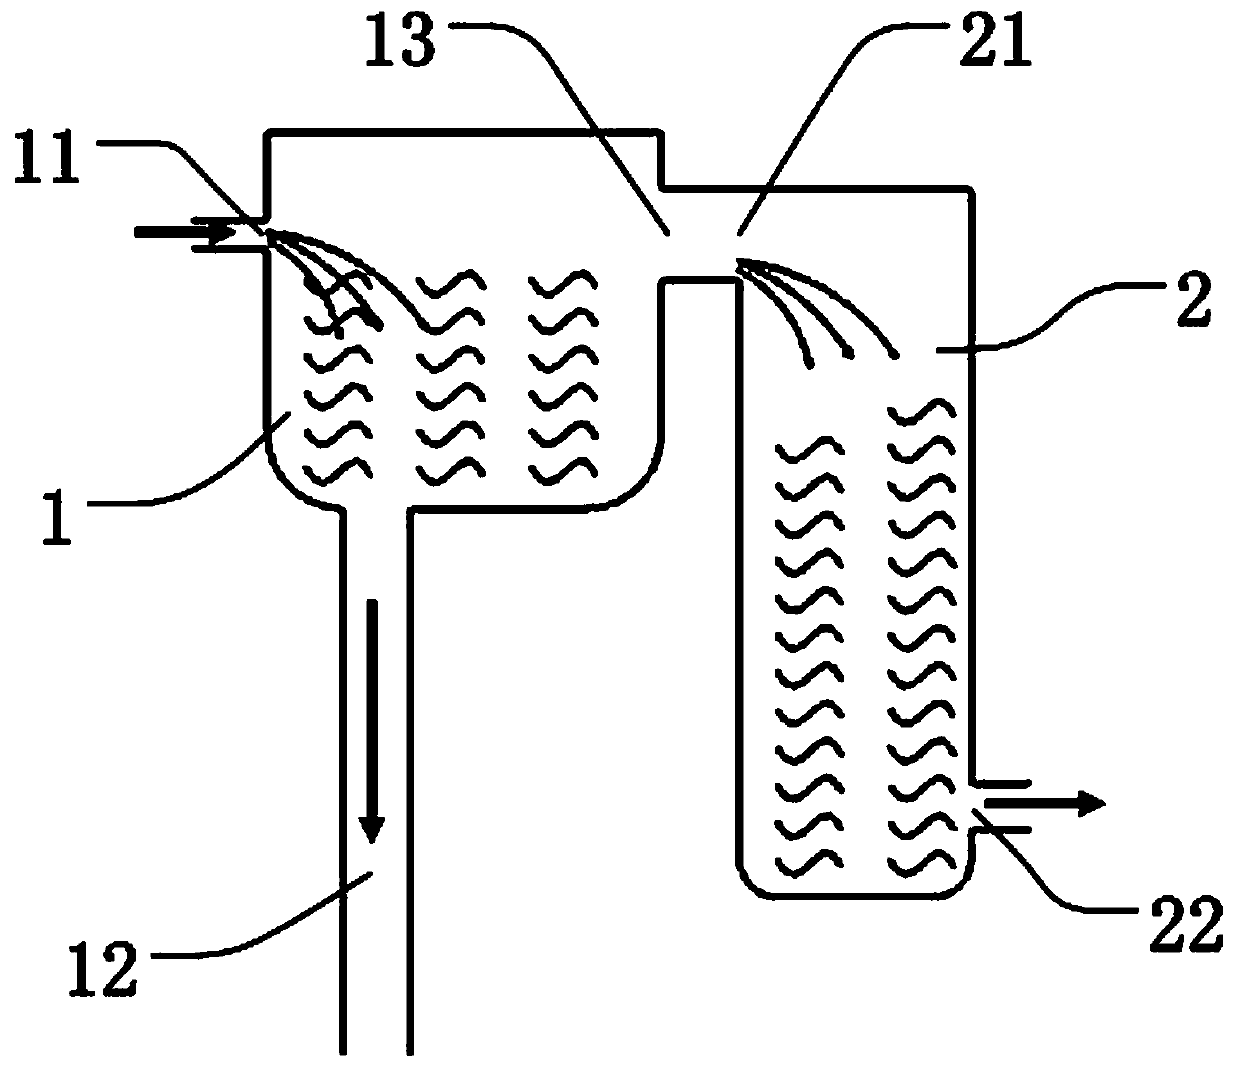 A liquid storage tank with stable liquid output flow